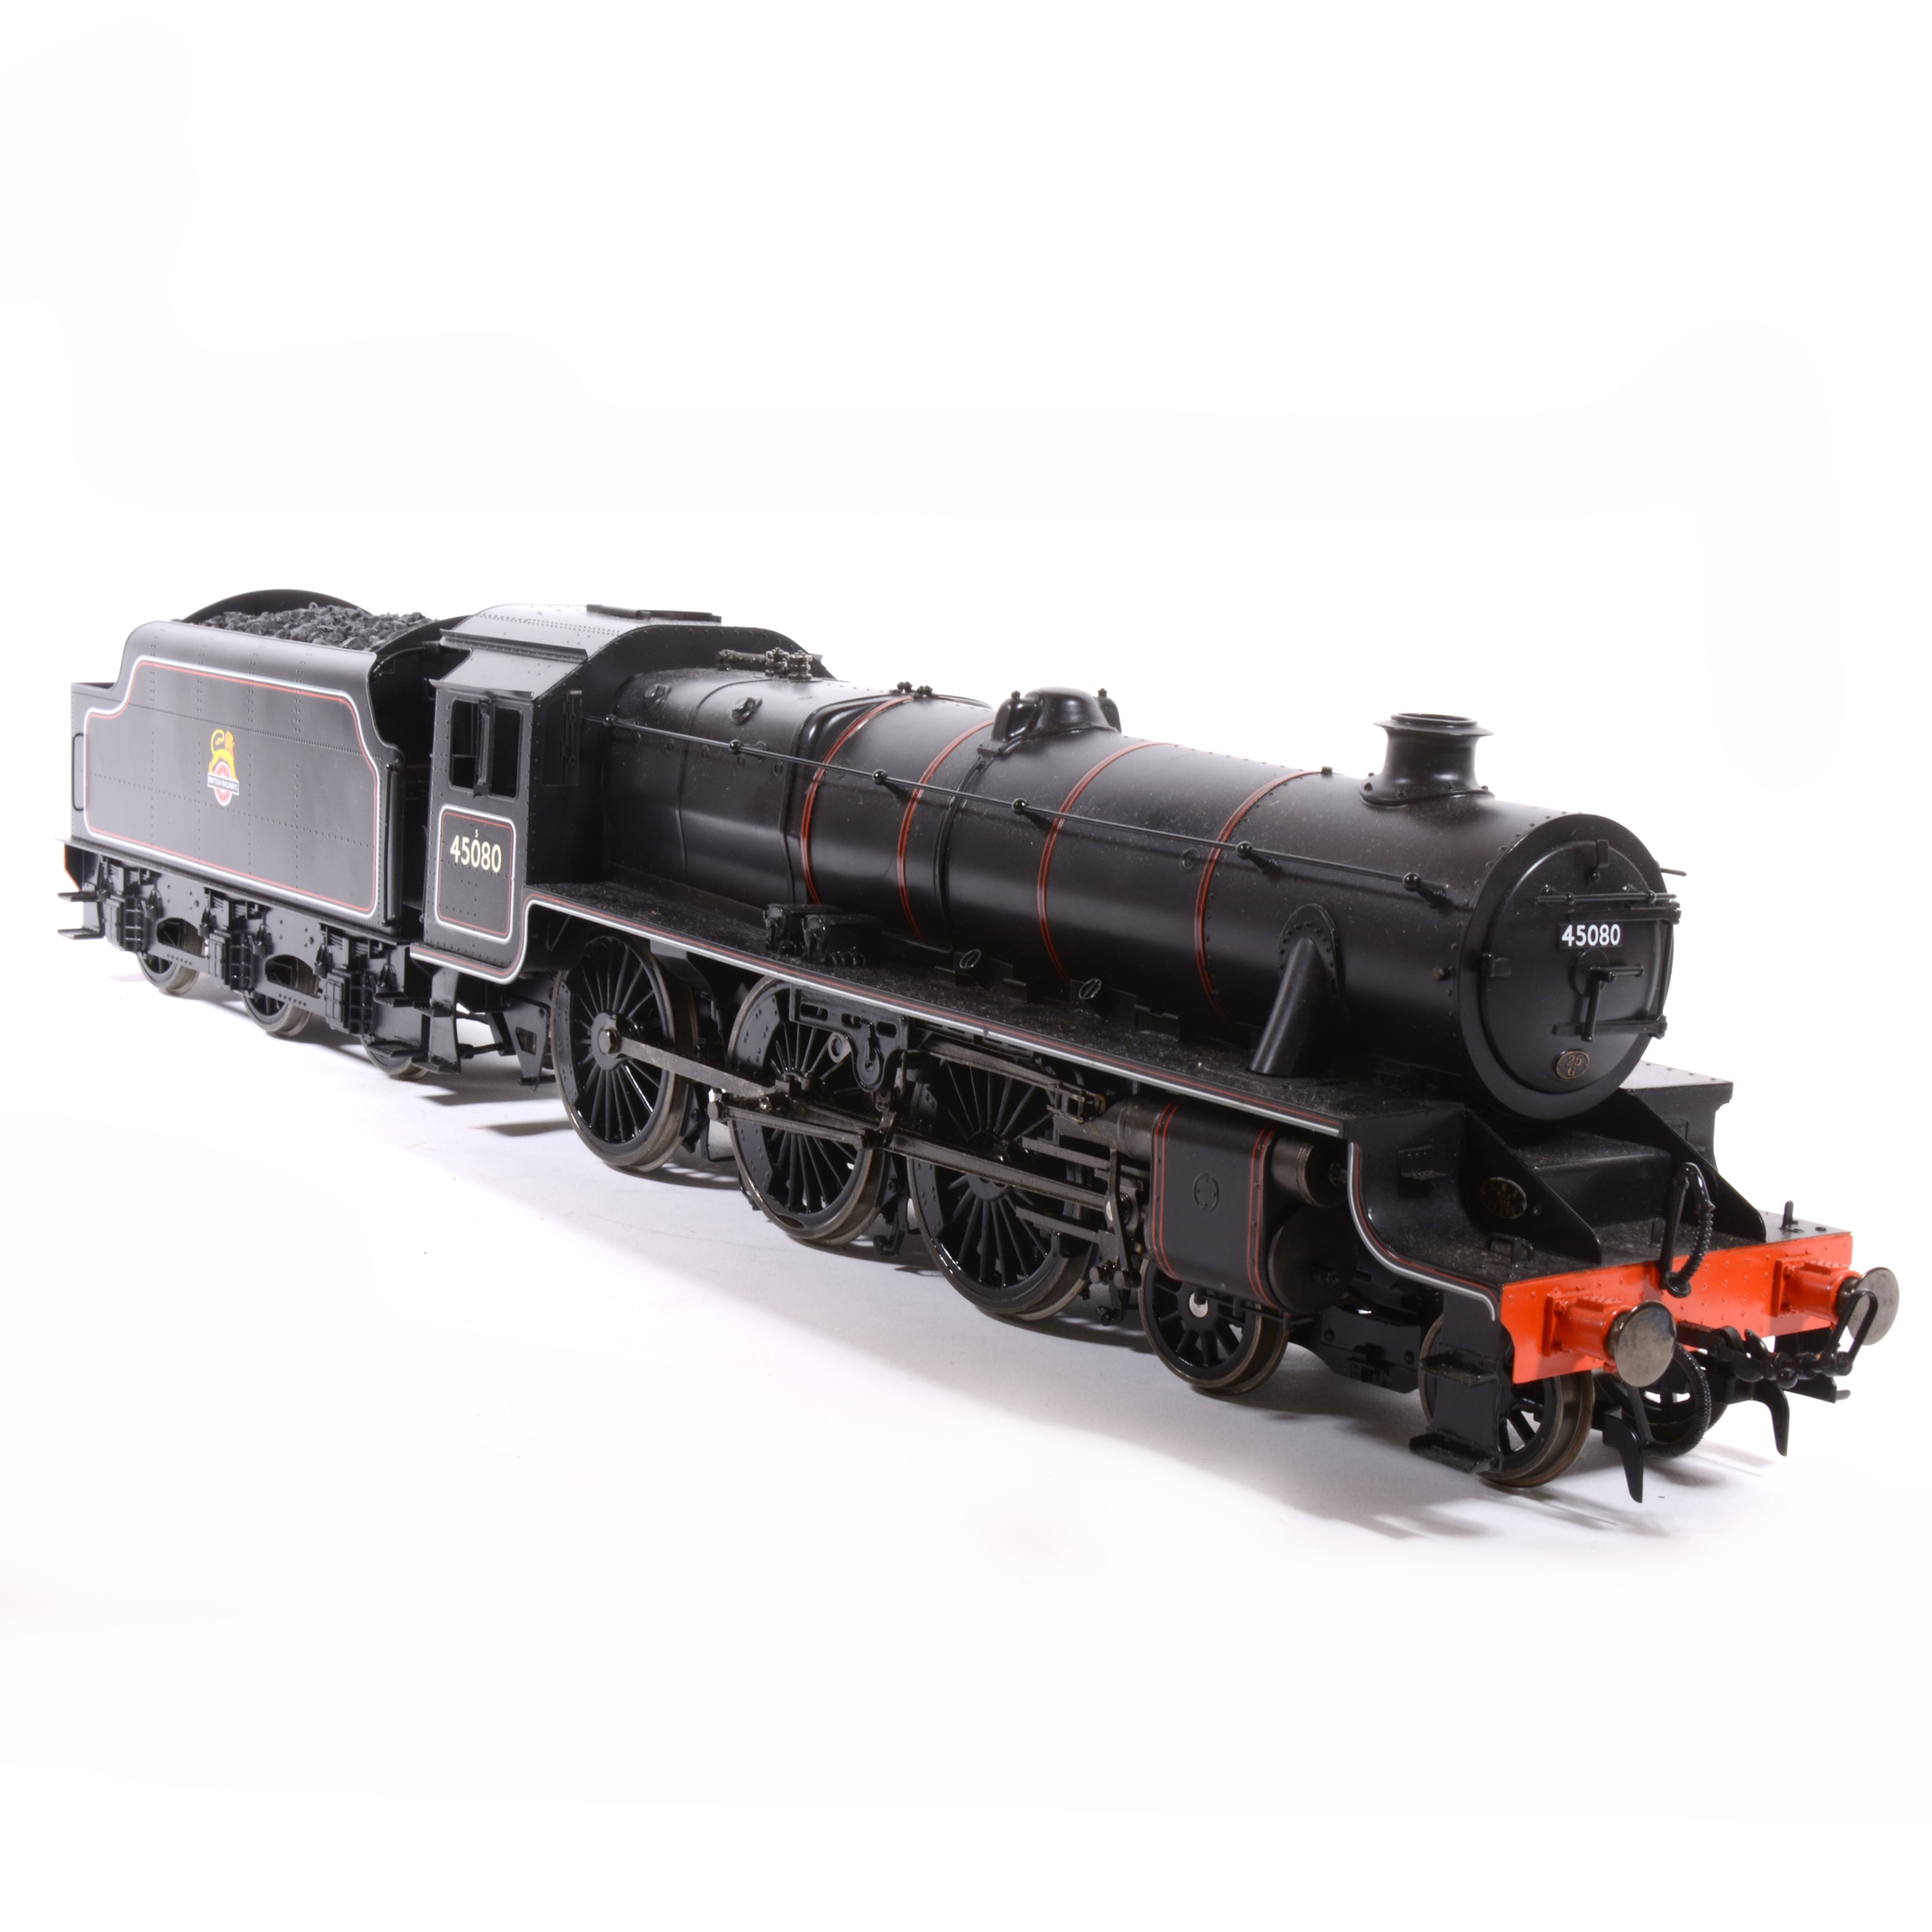 Accucraft electric, gauge 1 / G scale, 45mm locomotive and tender; 'Black Five' BR no.45080, in - Image 3 of 3